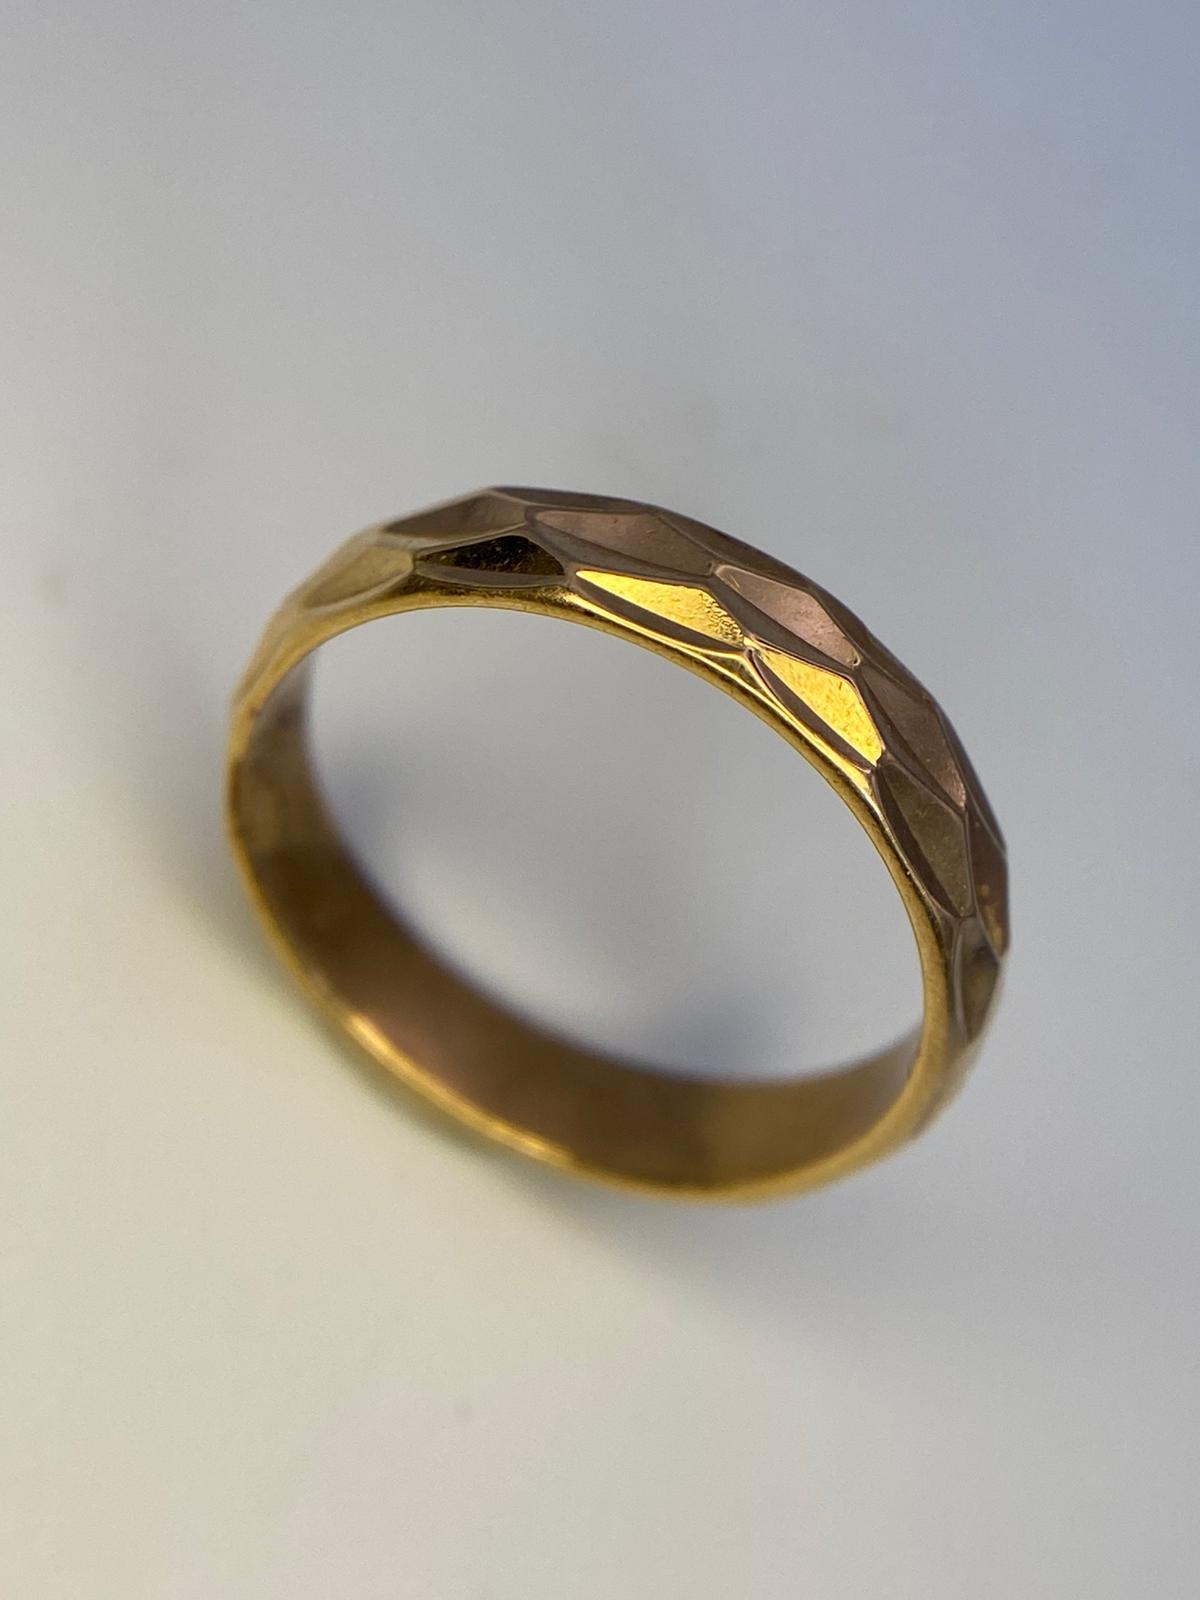 A 9K Yellow Gold Faceted Band Ring. Size M. 2.9g weight. - Image 2 of 4